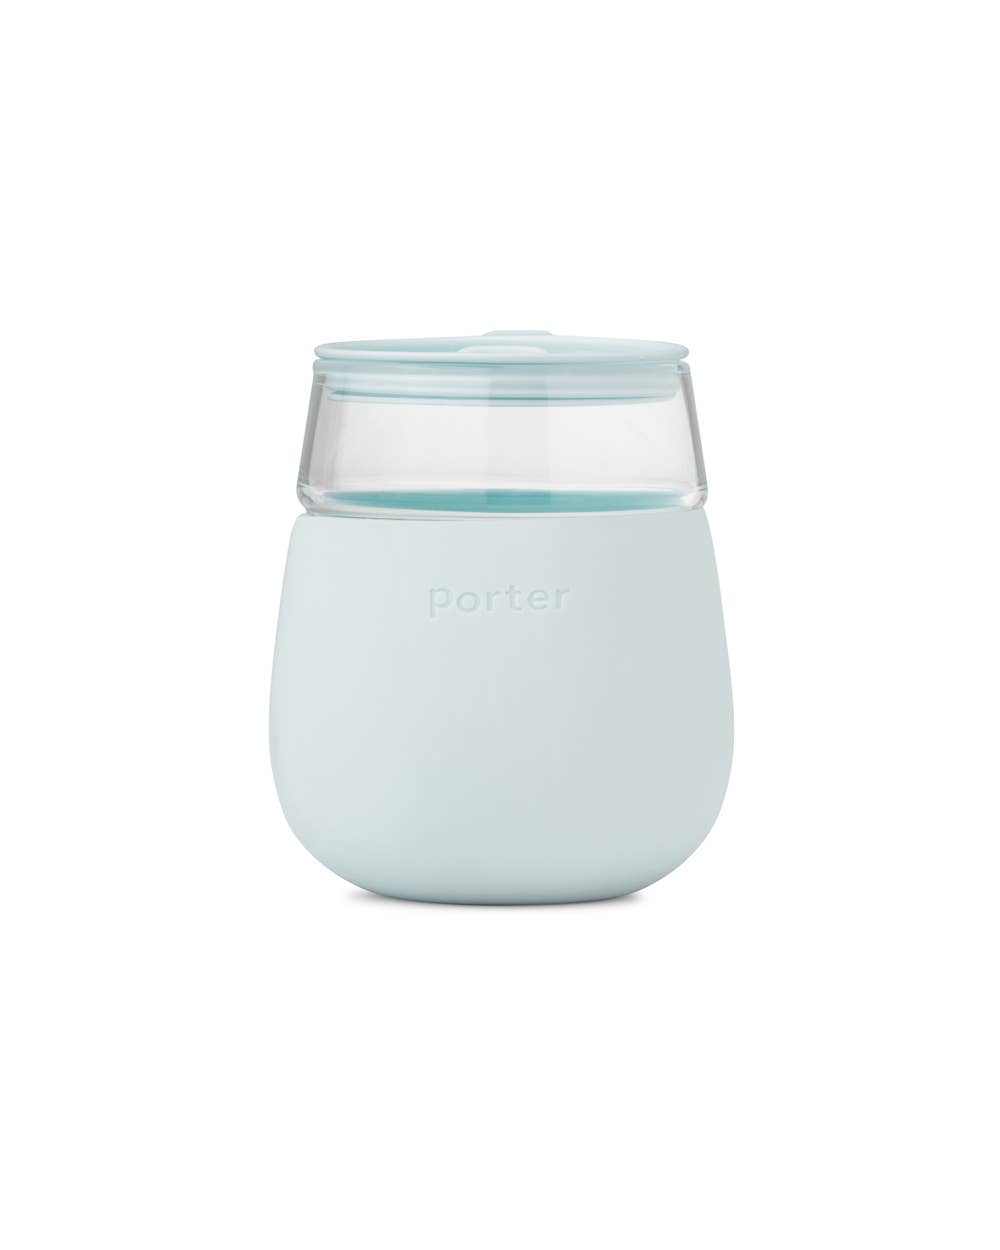 Wine & Drink Glass Cup with Silicone Wrap: Lavender